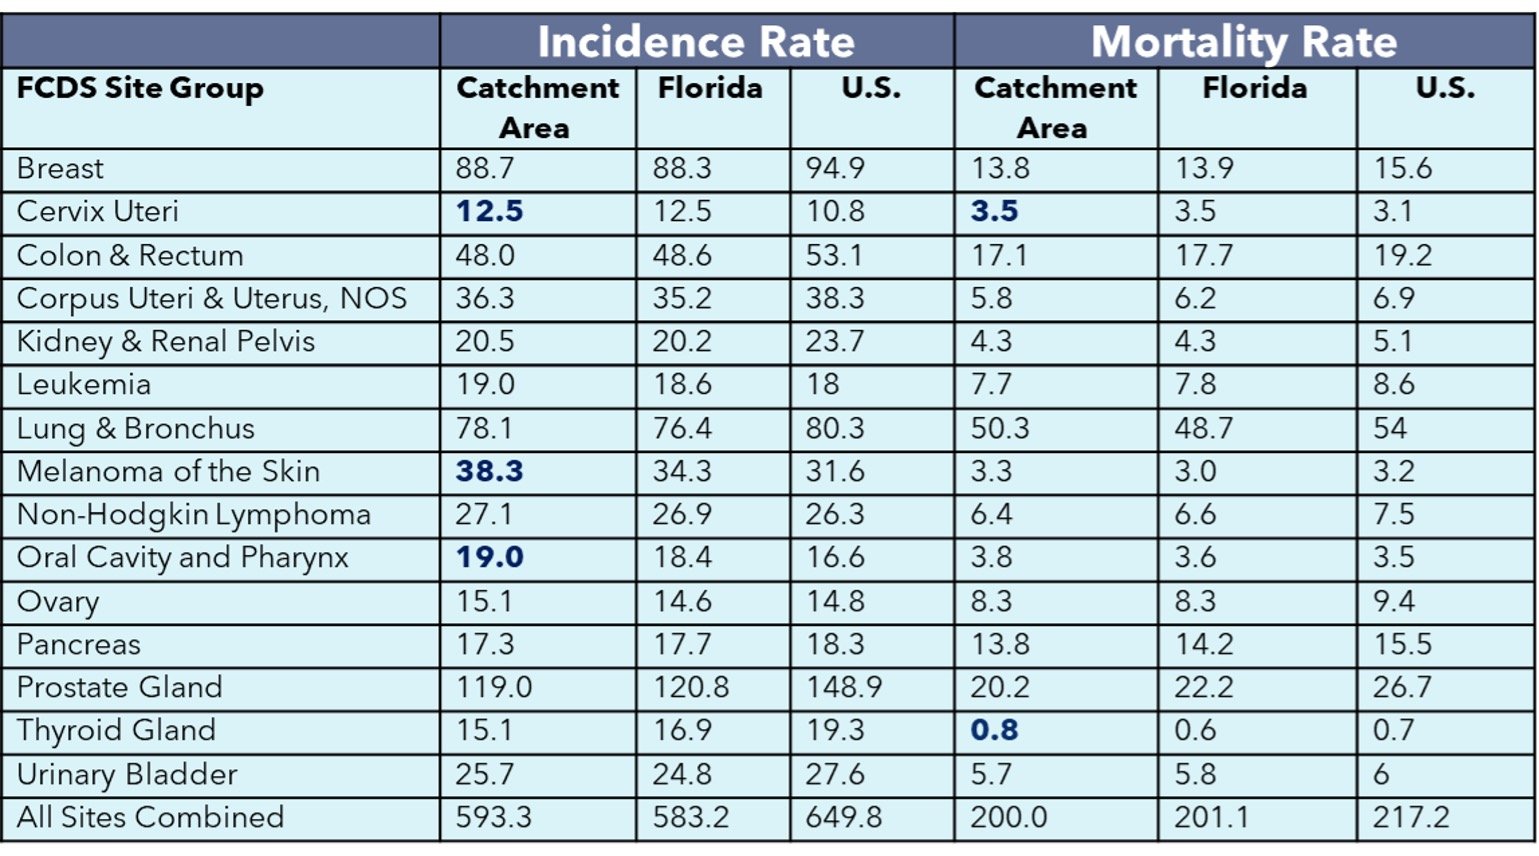 Top 15 Age-Adjusted Incident Cancers chart